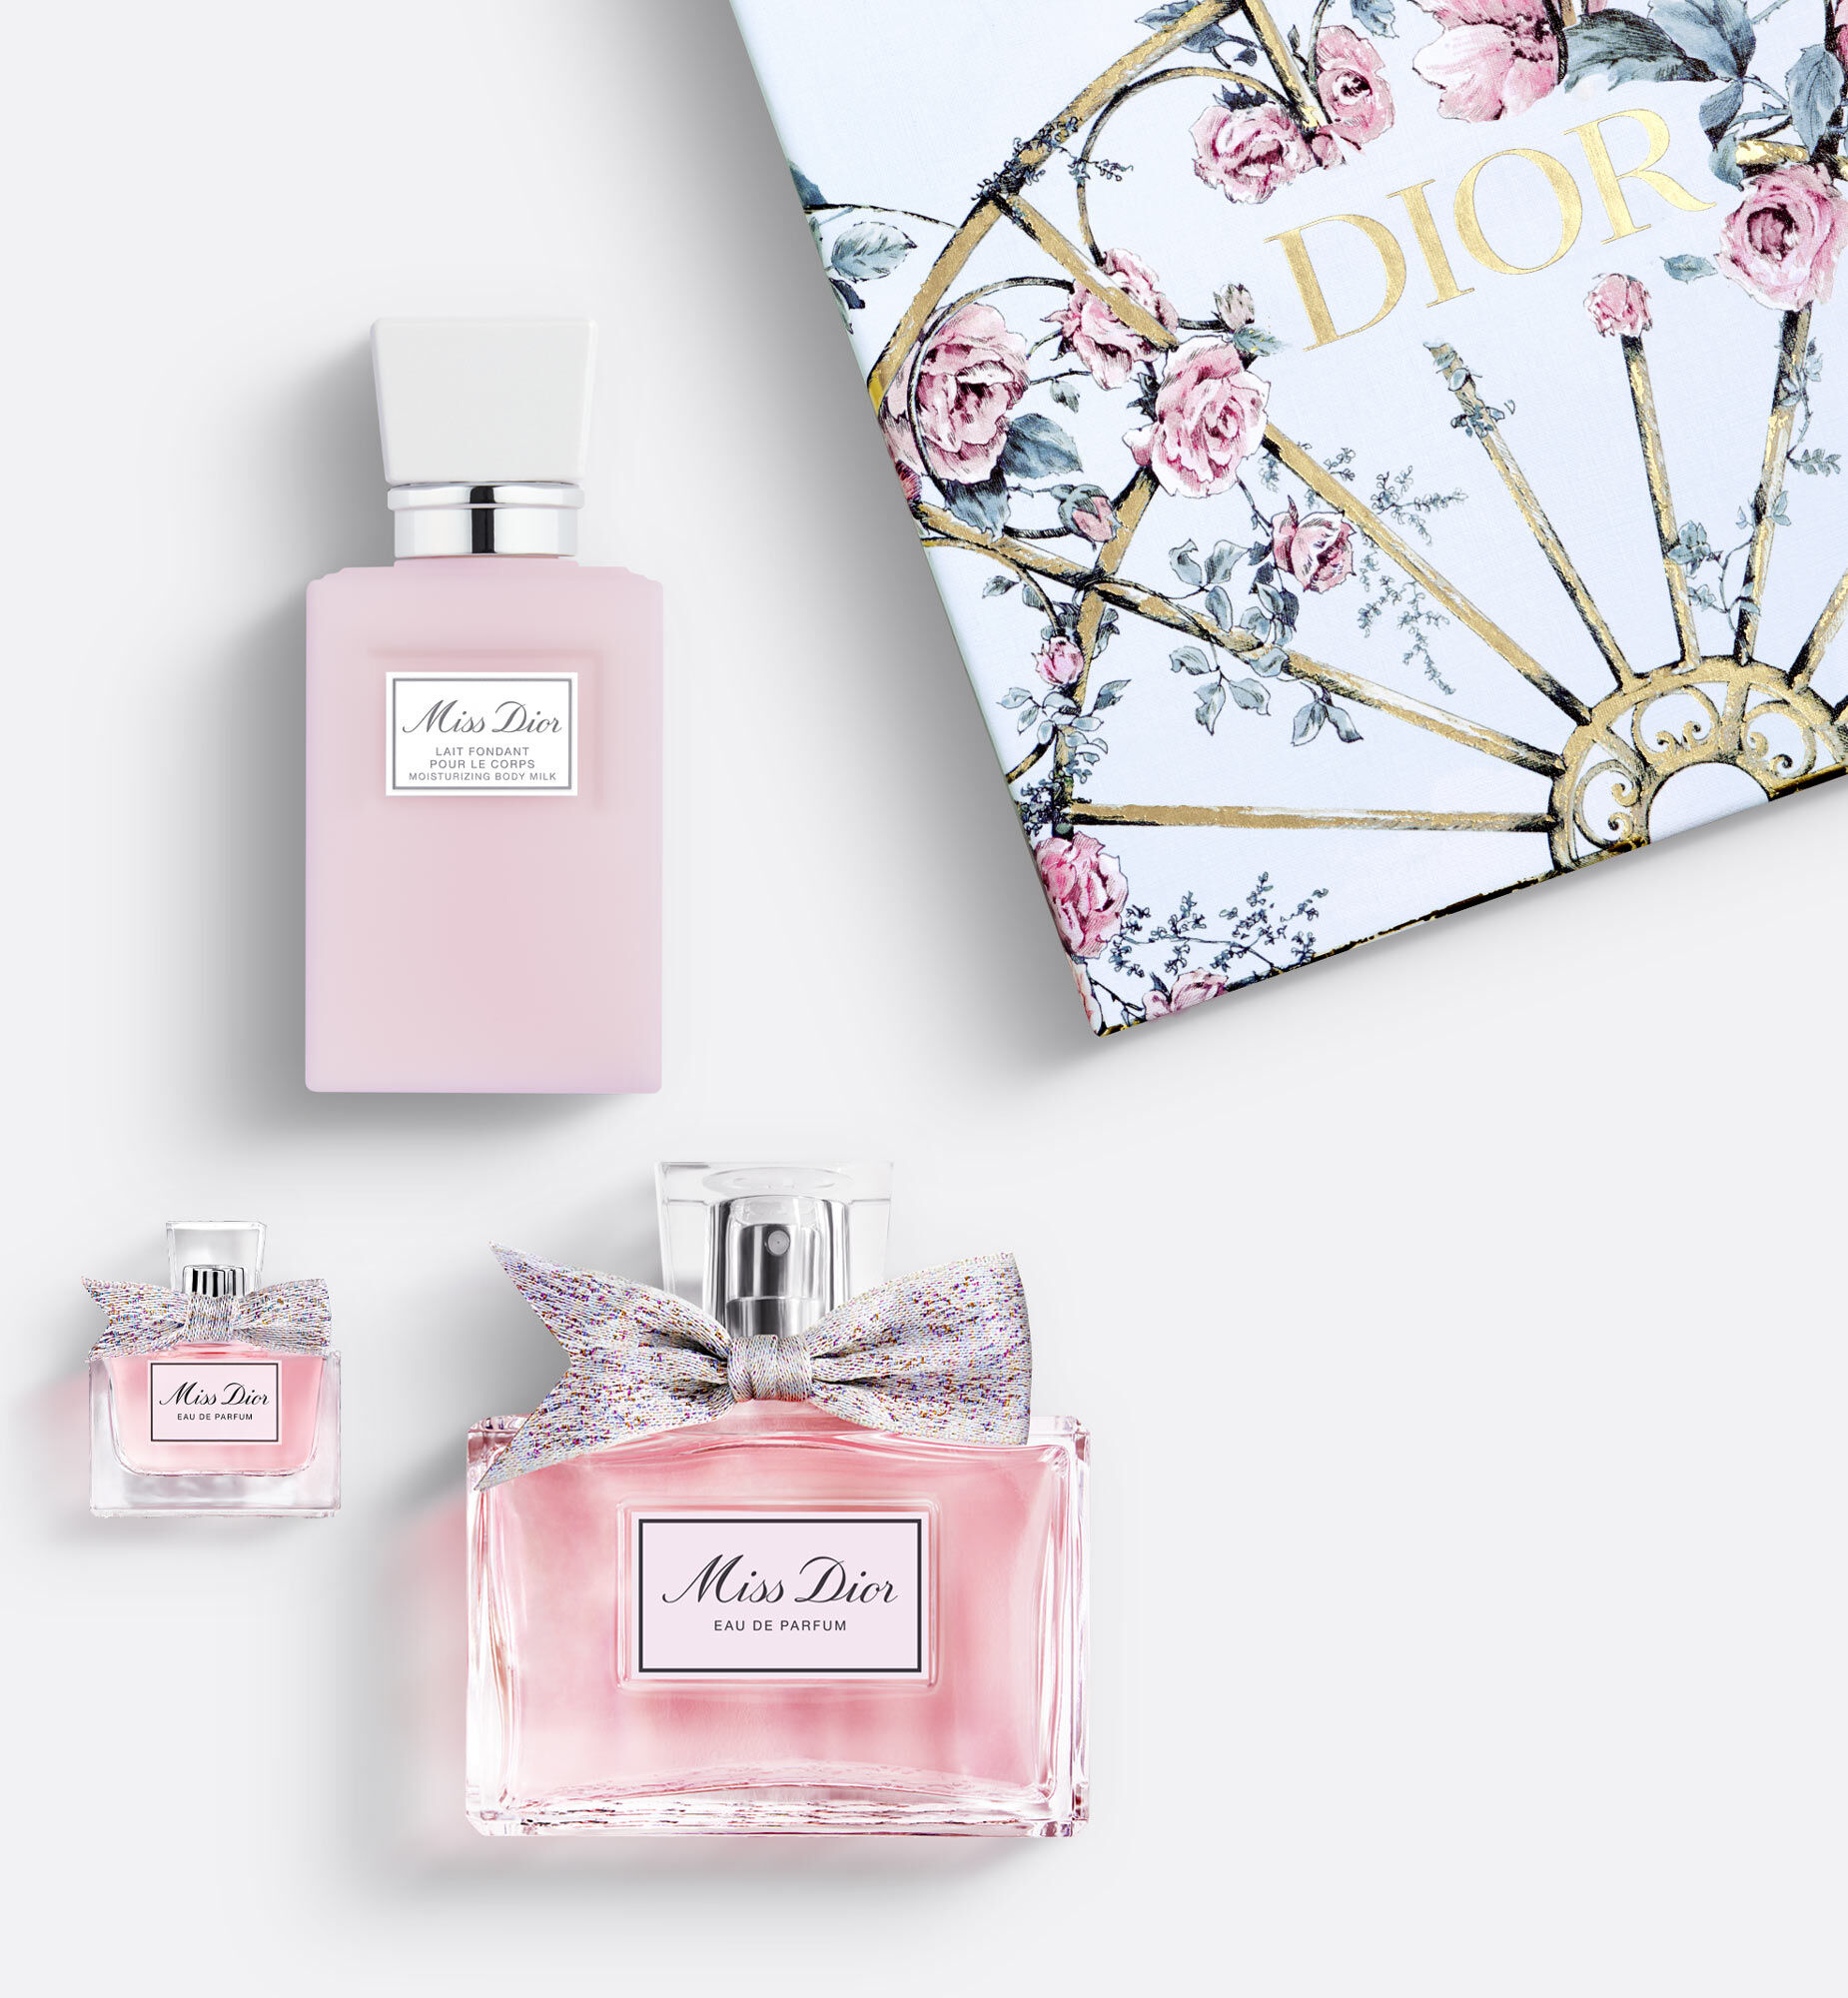 Fragrances for Her  Dior Ladies Mini Gift Set4  30mlPARALLEL IMPORT  was sold for R45000 on 28 Nov at 1522 by SMARTDEALSSA in Johannesburg  ID571677074